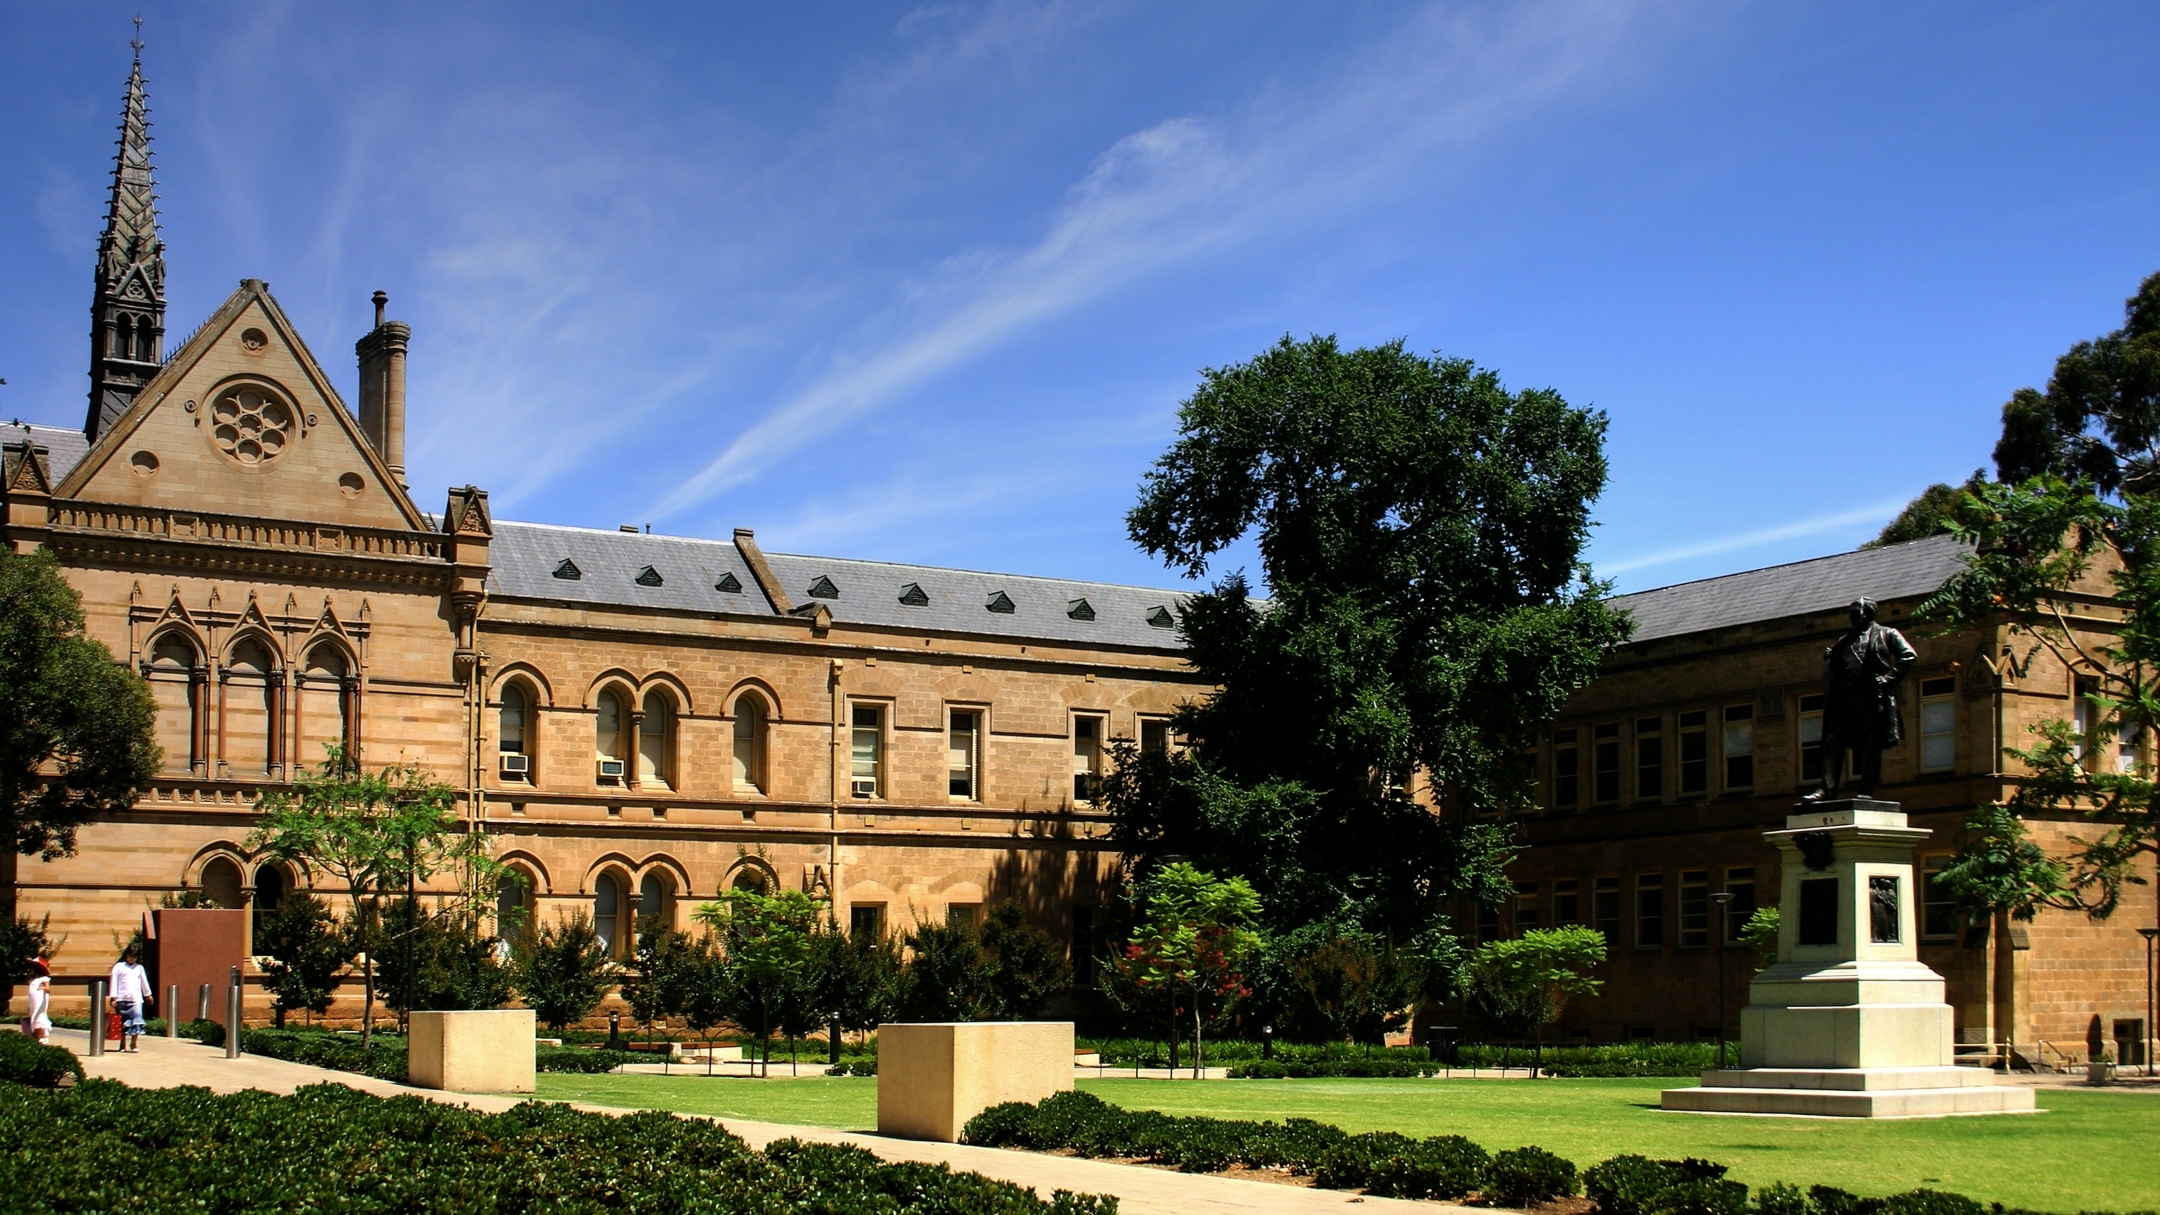 The University of Adelaide campus is shown in an undated photo. (Getty Images)